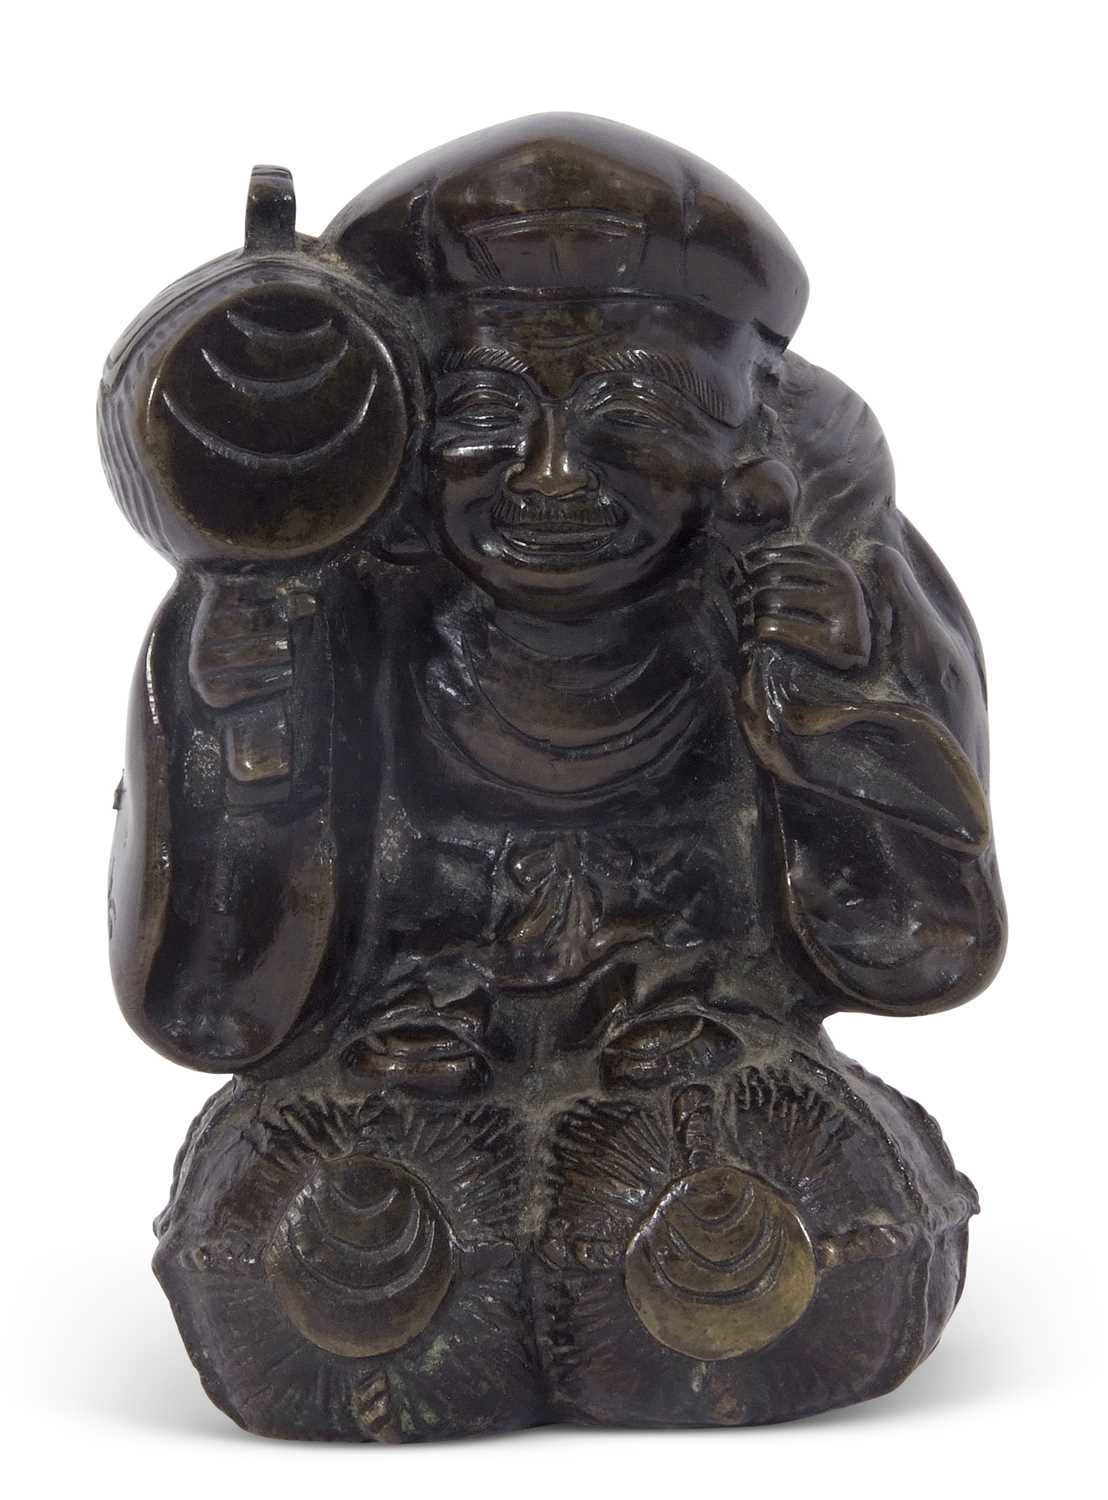 Lot 26 - Heavy bronze figure of a Chinese deity, 14cm high